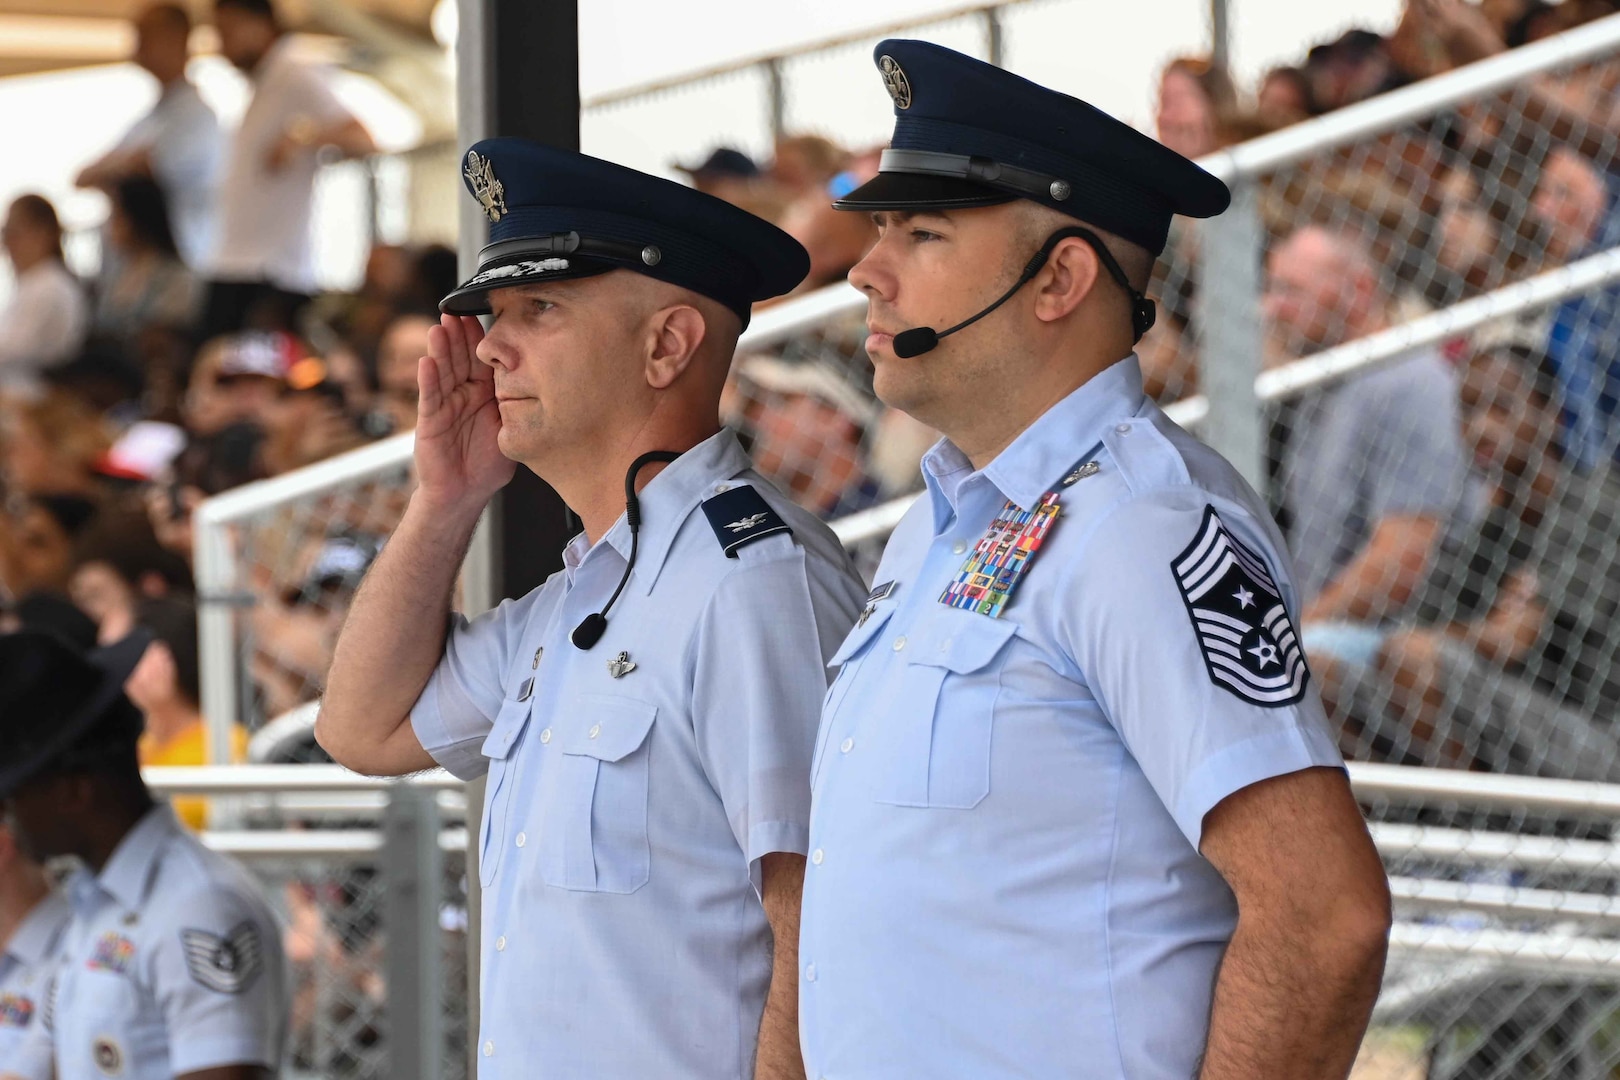 U.S. Air Force Col. Jeff Marshall, 97th Air Mobility Wing (AMW) commander, salutes graduating Airmen, while Chief Master Sgt. Justin Brundage, 97th AMW command chief, stands at attention, during the Basic Military Training graduation pass in review at Joint Base San Antonio-Lackland, Texas, May 16, 2024. Marshall served as the reviewing official for the graduation parade. (U.S. Air Force photo by Senior Airman Kari Degraffenreed)